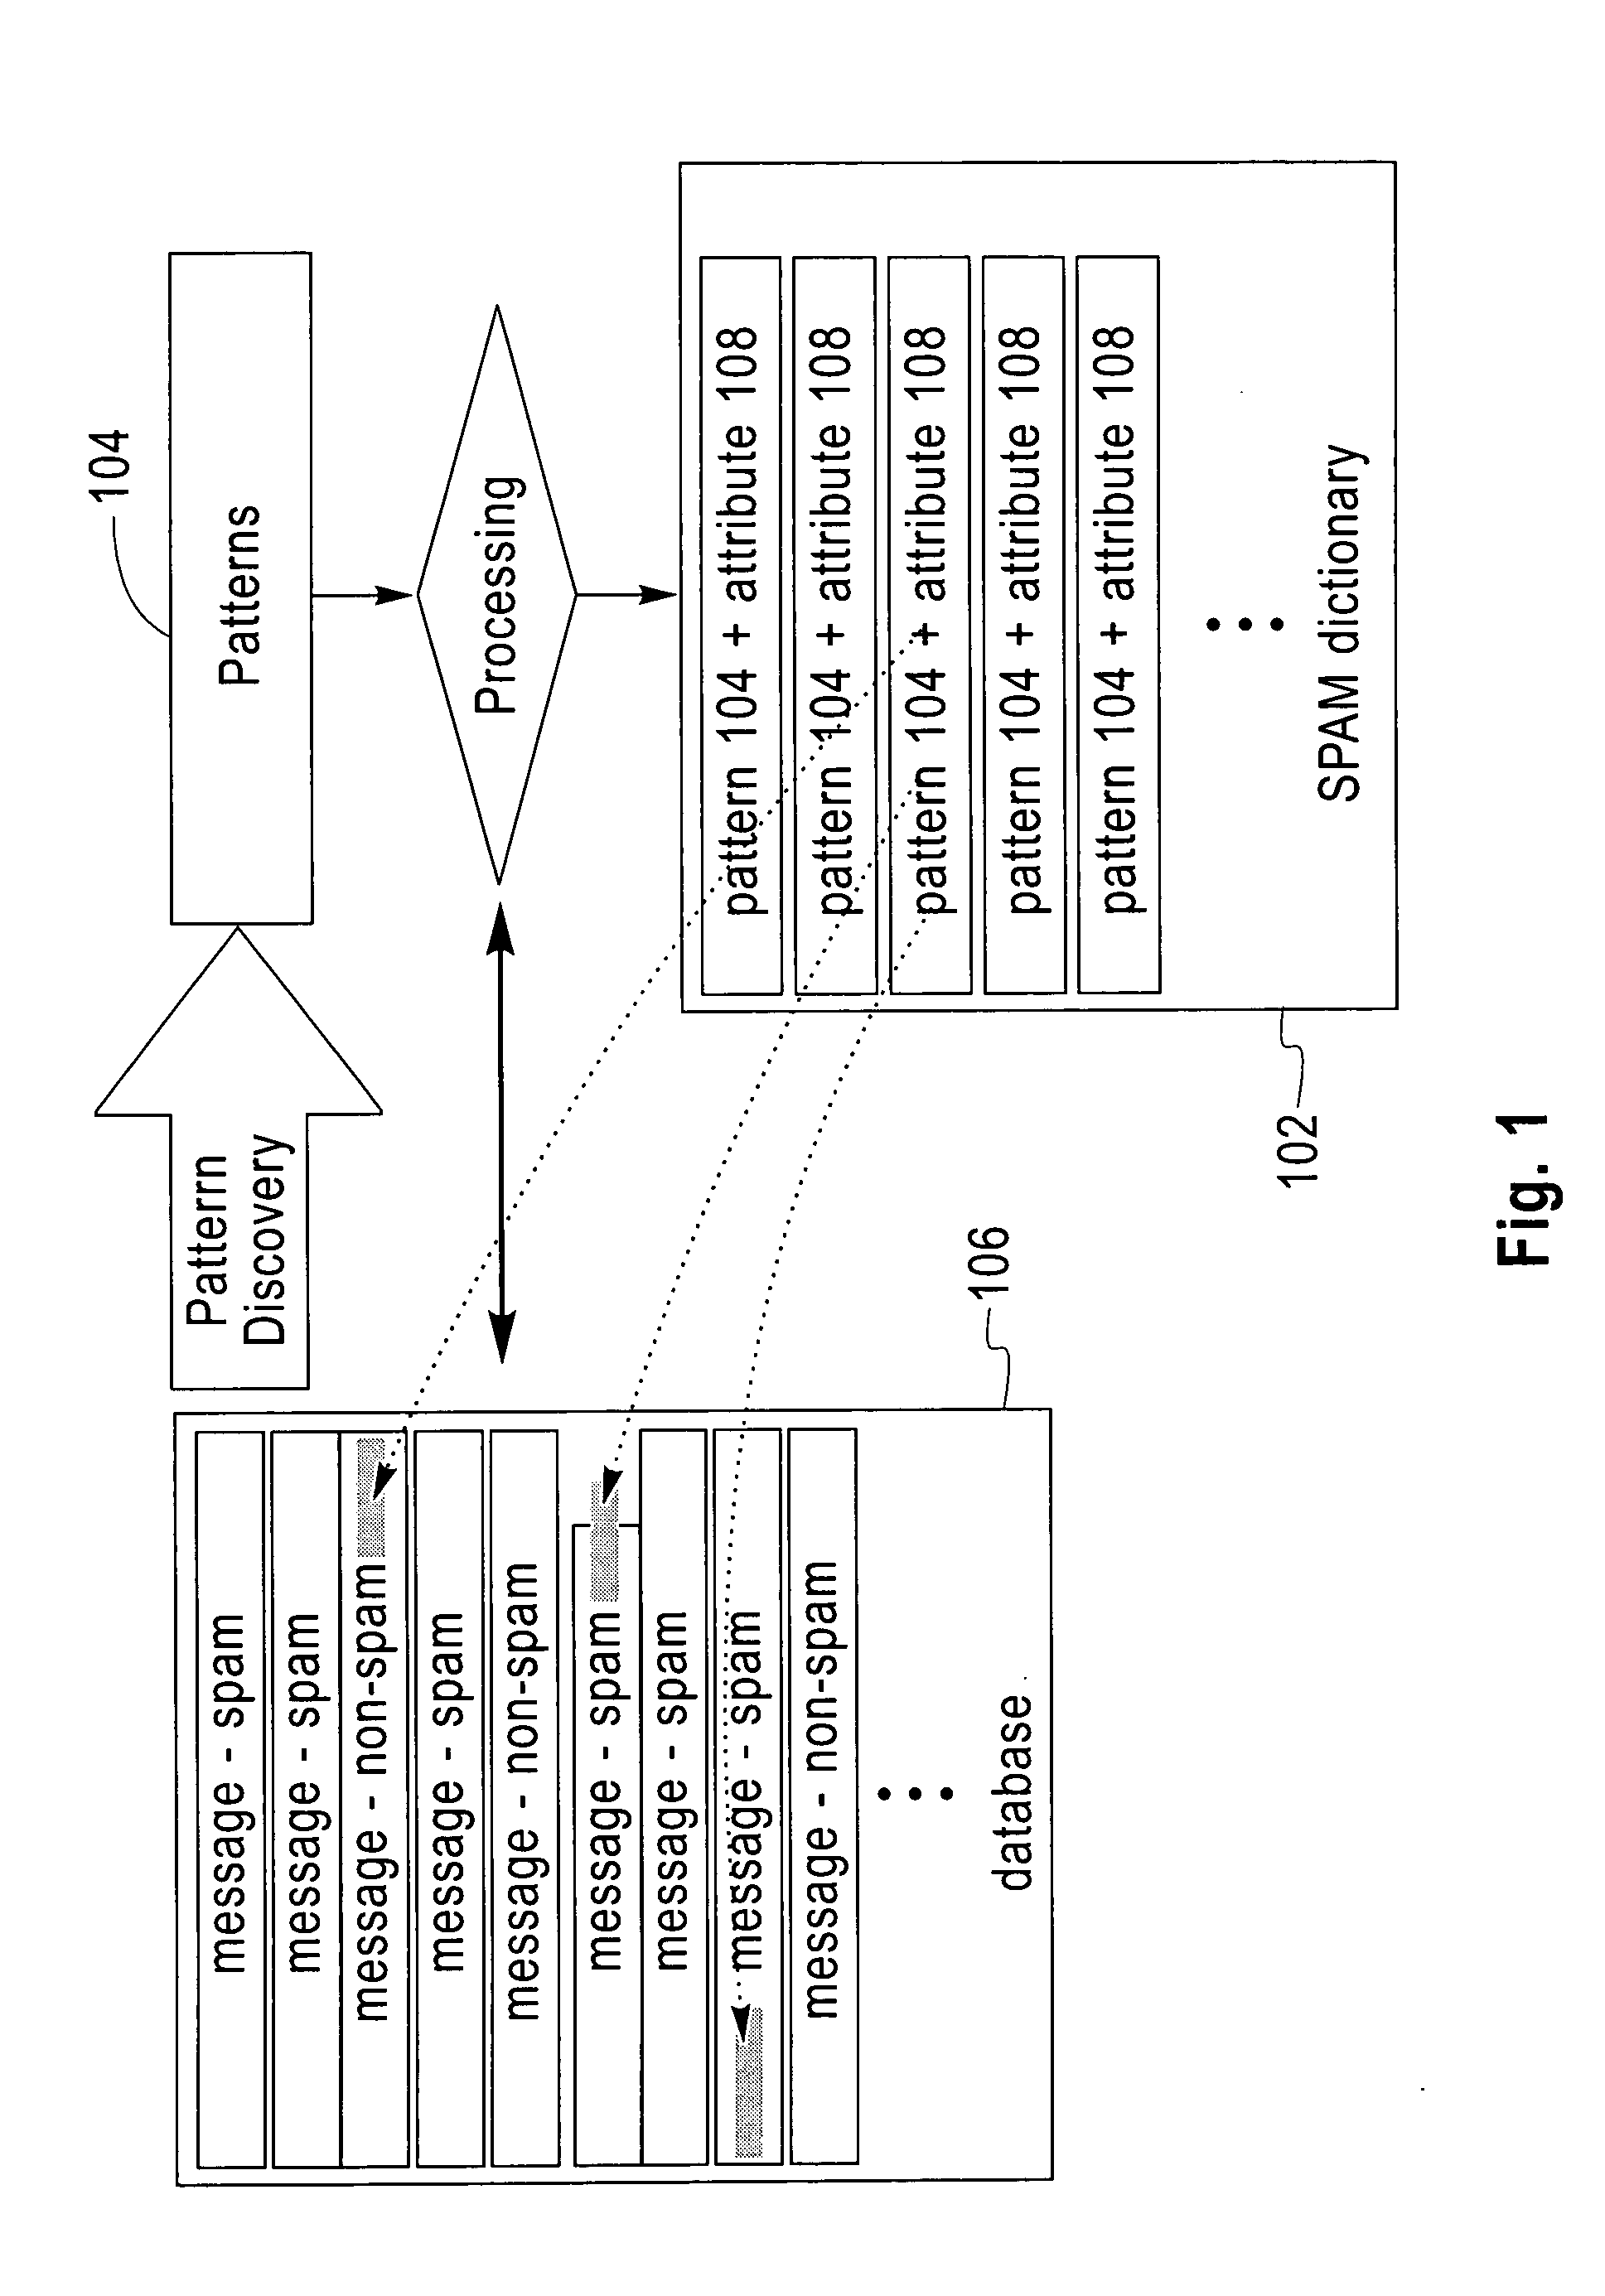 Method and apparatus for the automatic identification of unsolicited e-mail messages (SPAM)